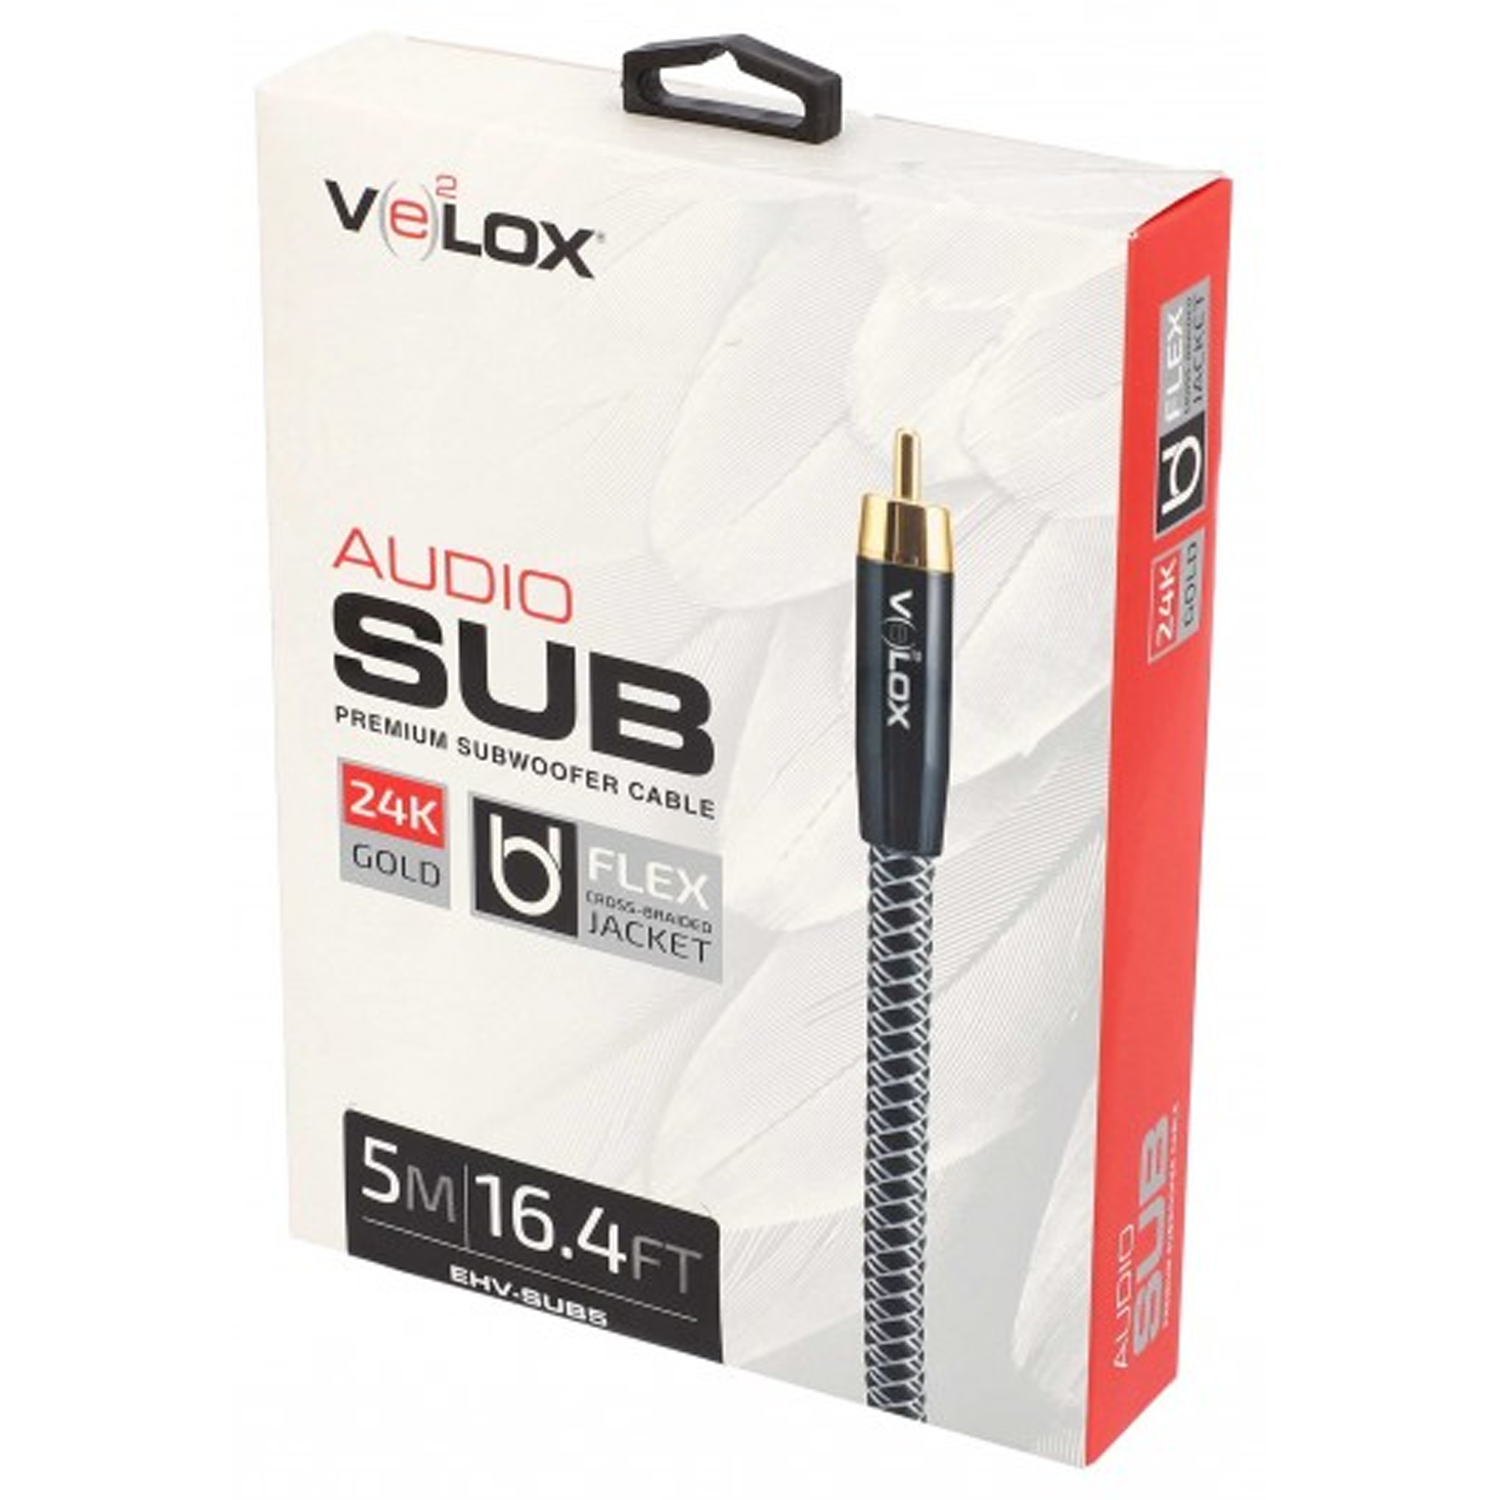 ETHEREAL EHV-SUB 16ft Velox Premium Subwoofer Cable